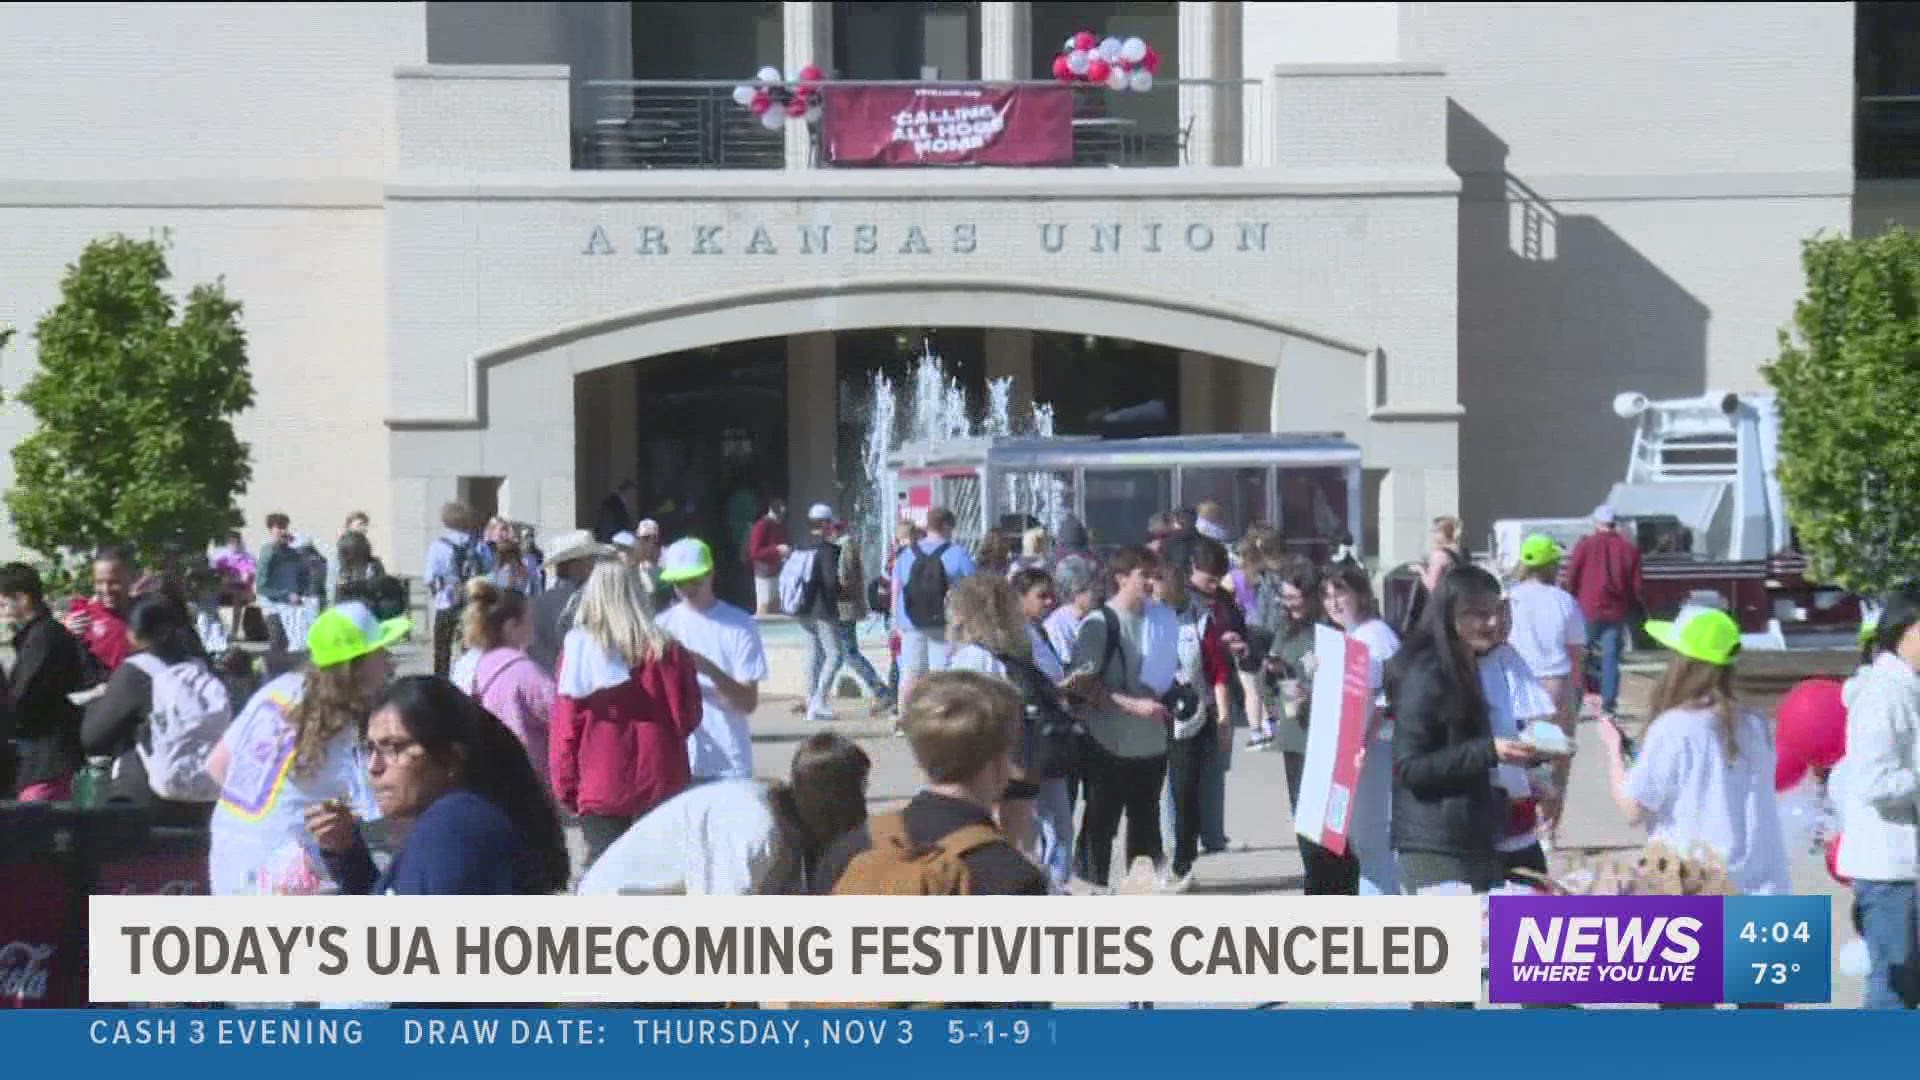 The homecoming events scheduled for Friday, Nov. 4 have been rescheduled due to the threat of severe storms.